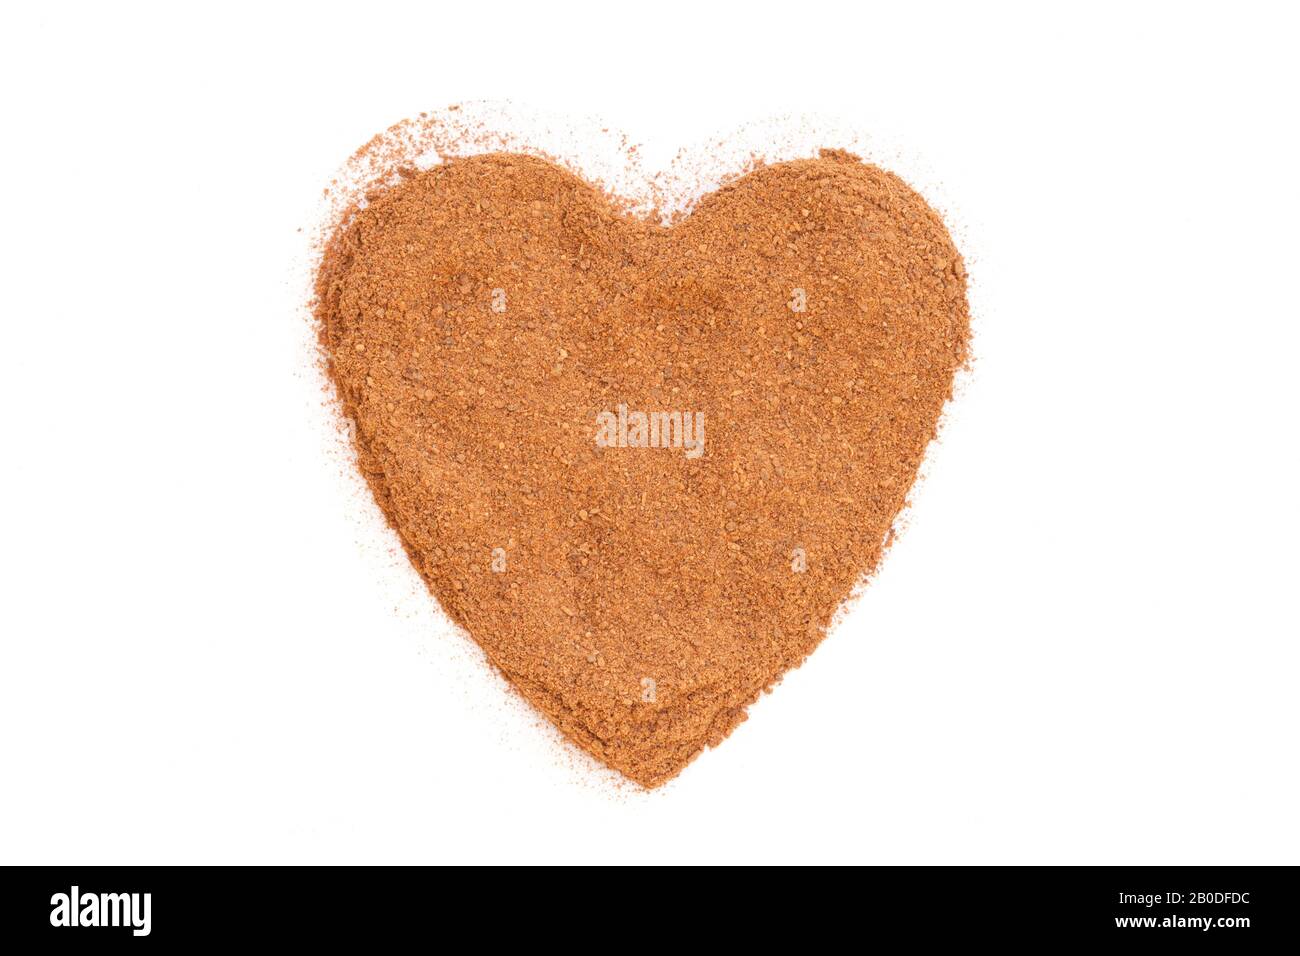 Heap of ground Cinnamon isolated in heart shape on white background.  As a spice or condiment cinnamon sold in the form of sticks or a hammer. Stock Photo